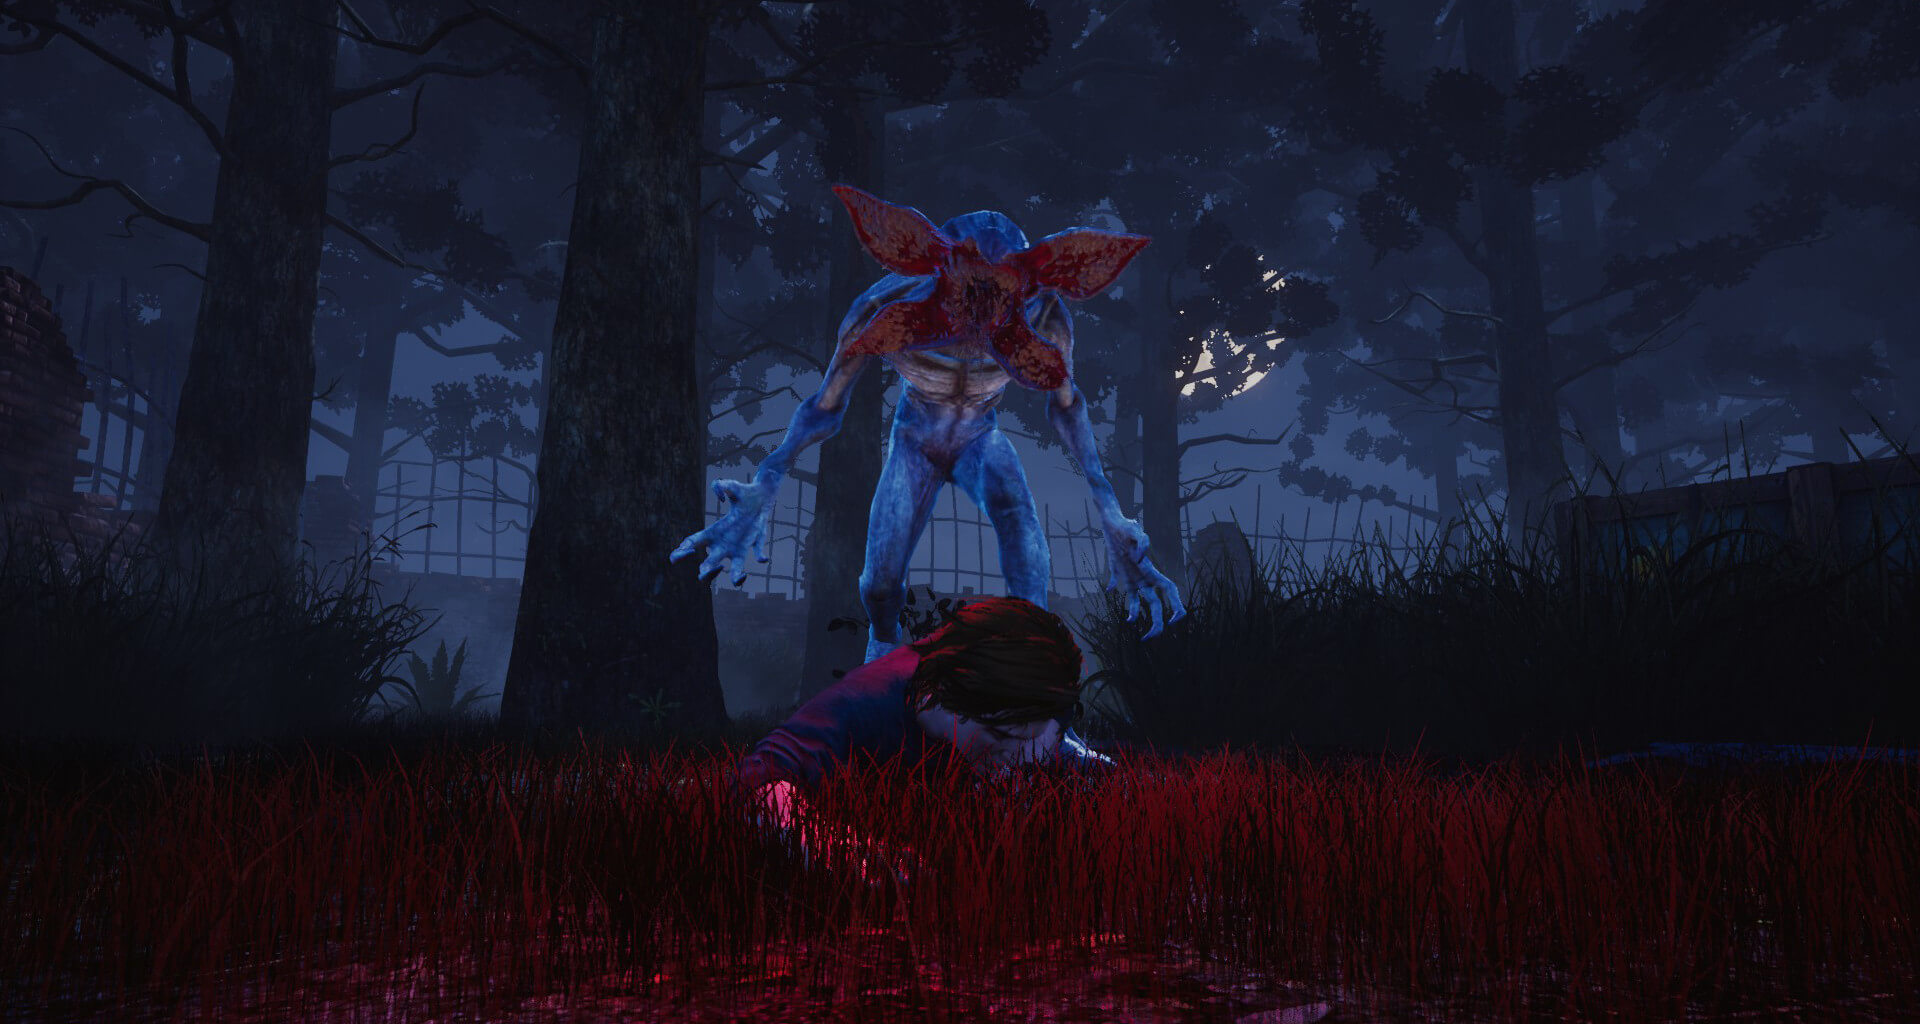 The Demogorgon in the Stranger Things chapter of Dead By Daylight